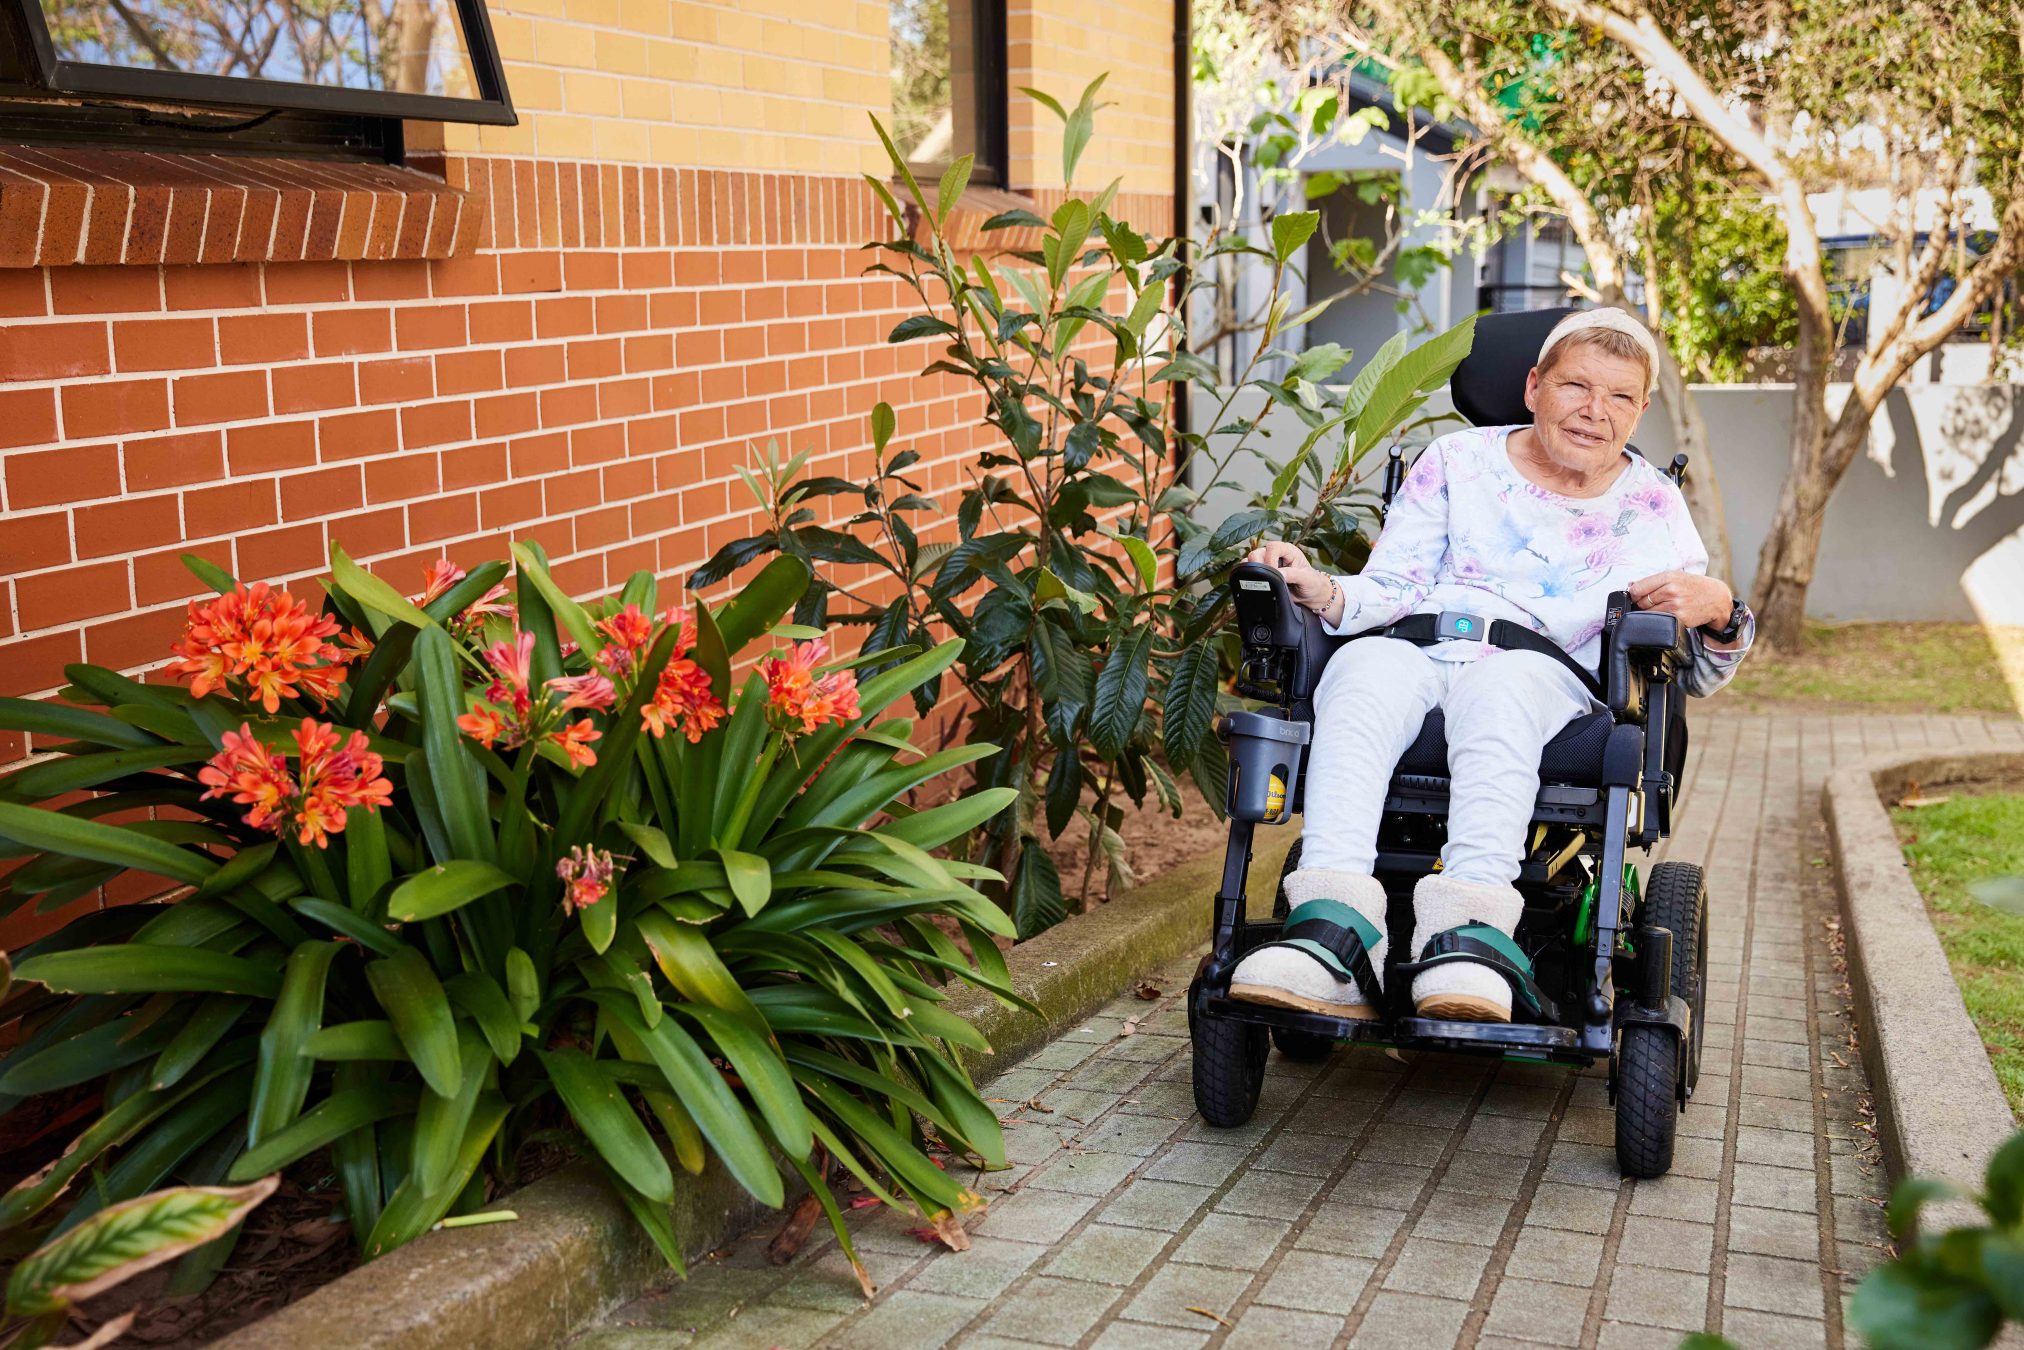 Woman in a powerchair coming up a ramp, smiling. Bright orange flowers surround.